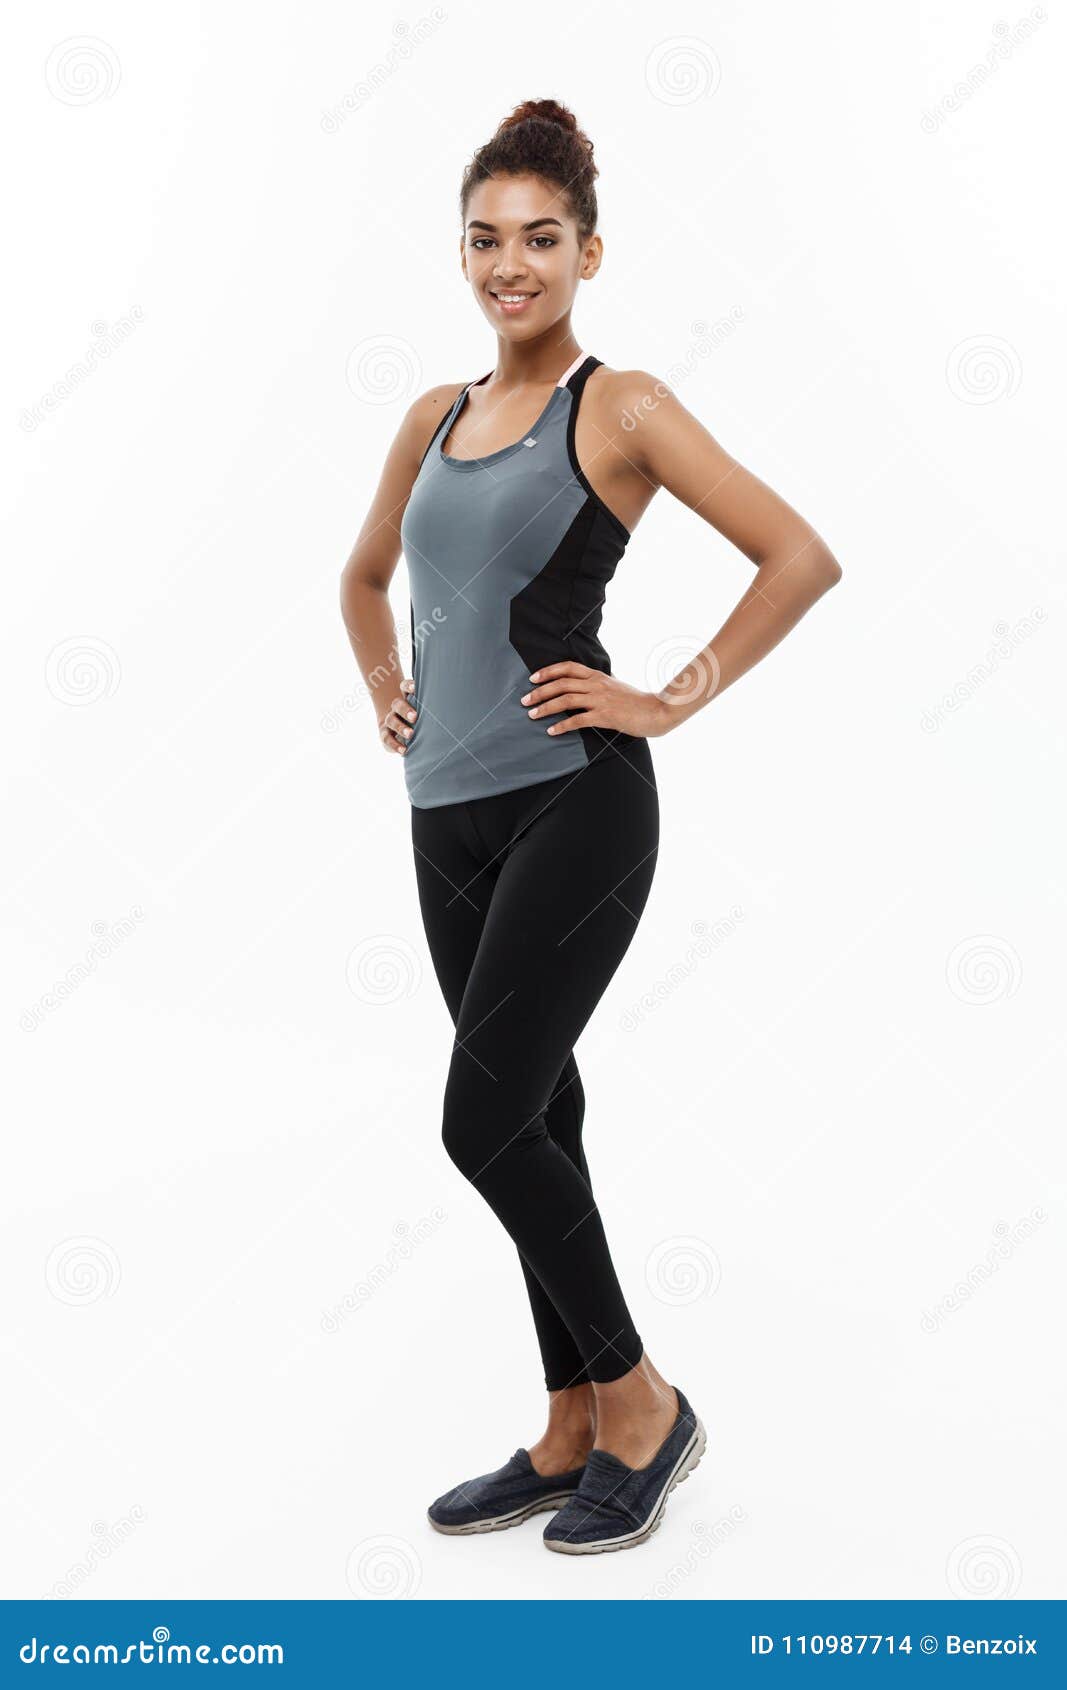 Healthy and Fitness Concept - Portrait of African American Girl Posing ...